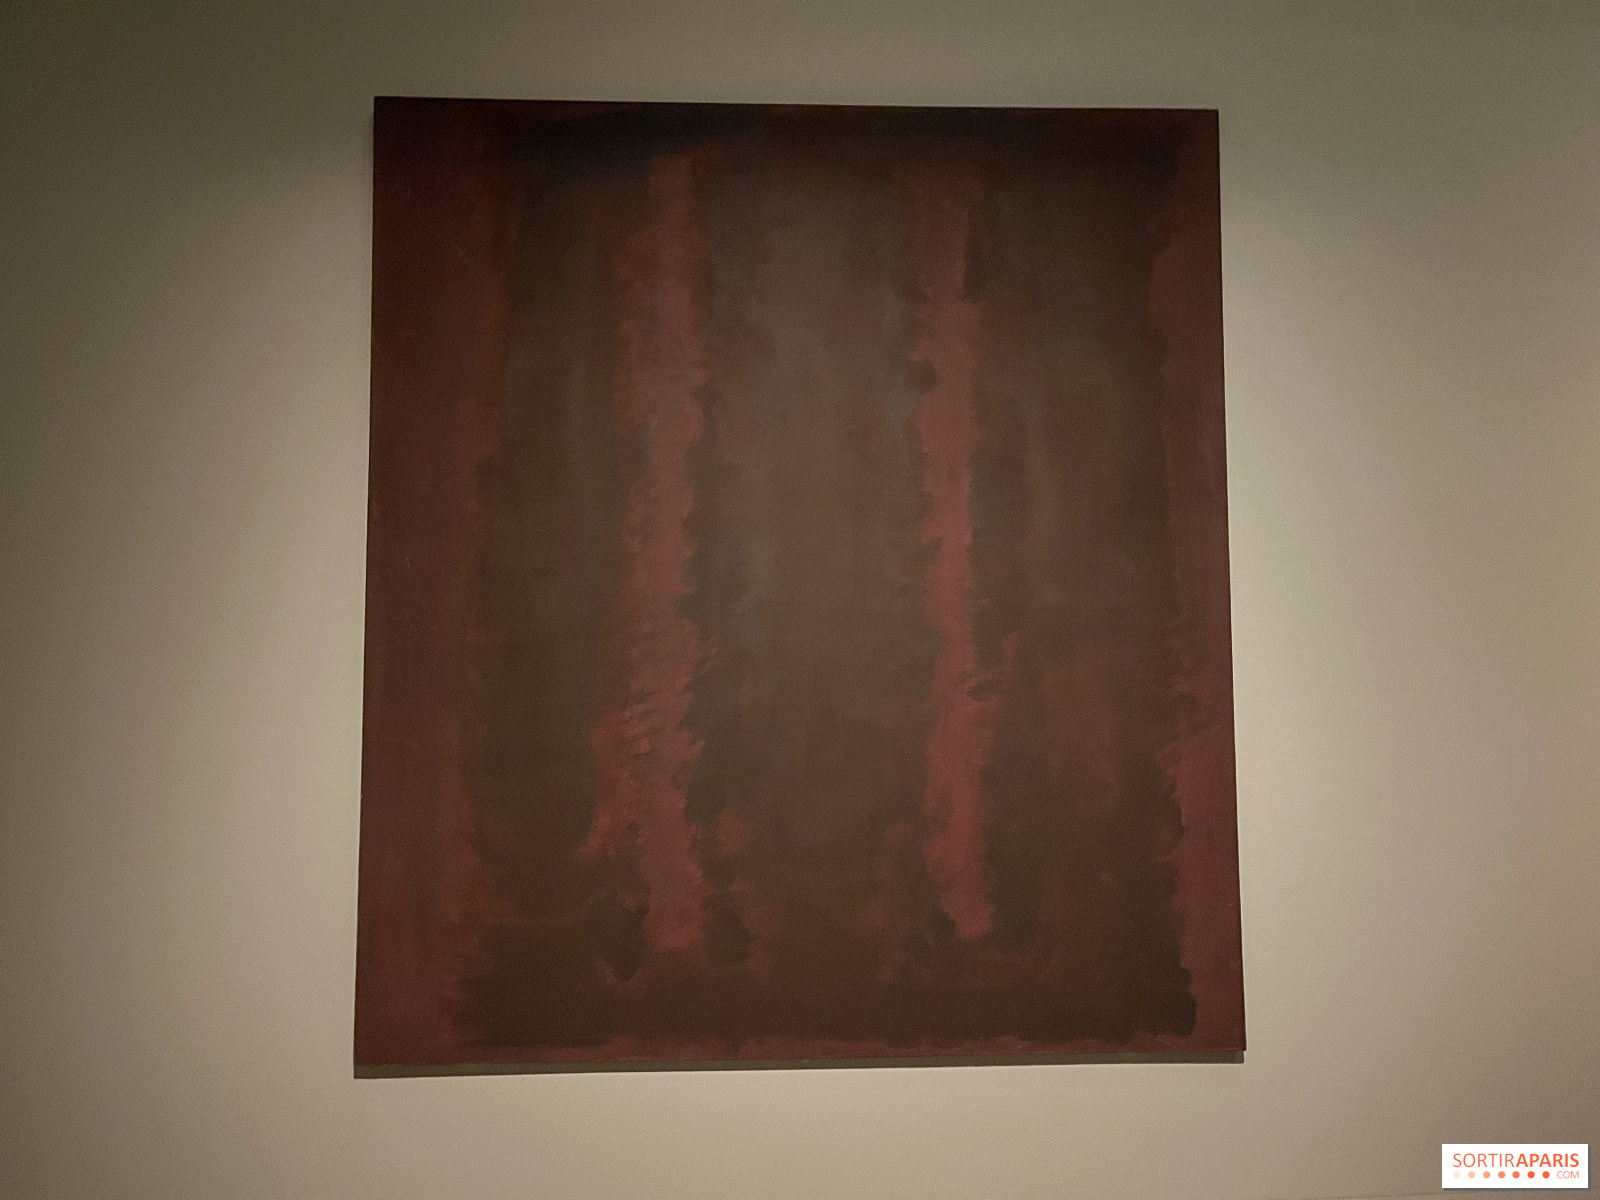 OPENING OF THE EXHIBITION  MARK ROTHKO AT THE FONDATION LOUIS VUITTON -  Numéro Netherlands